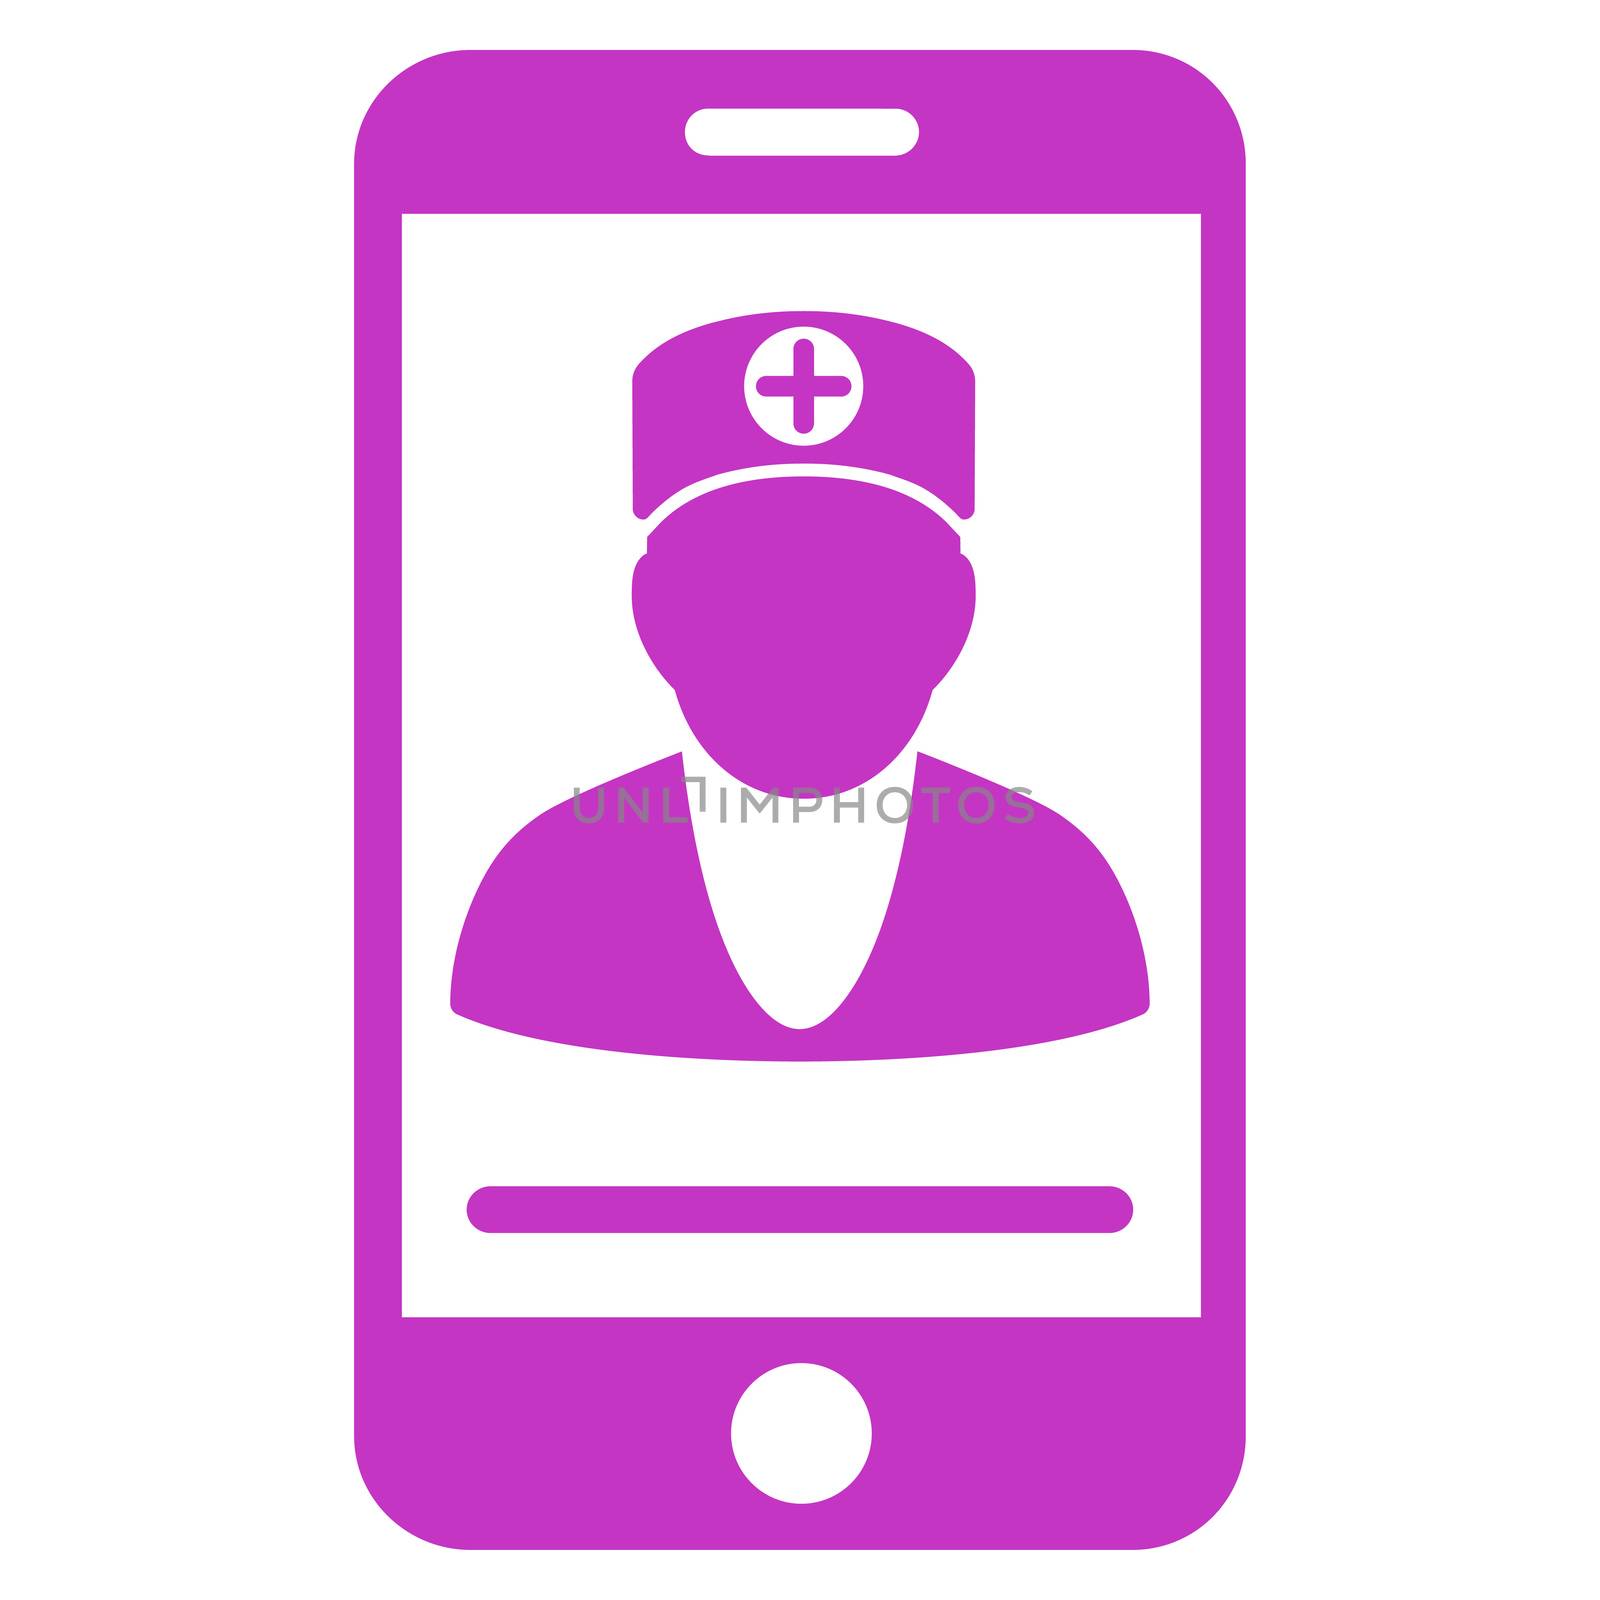 Online Doctor raster icon. Style is flat symbol, violet color, rounded angles, white background.